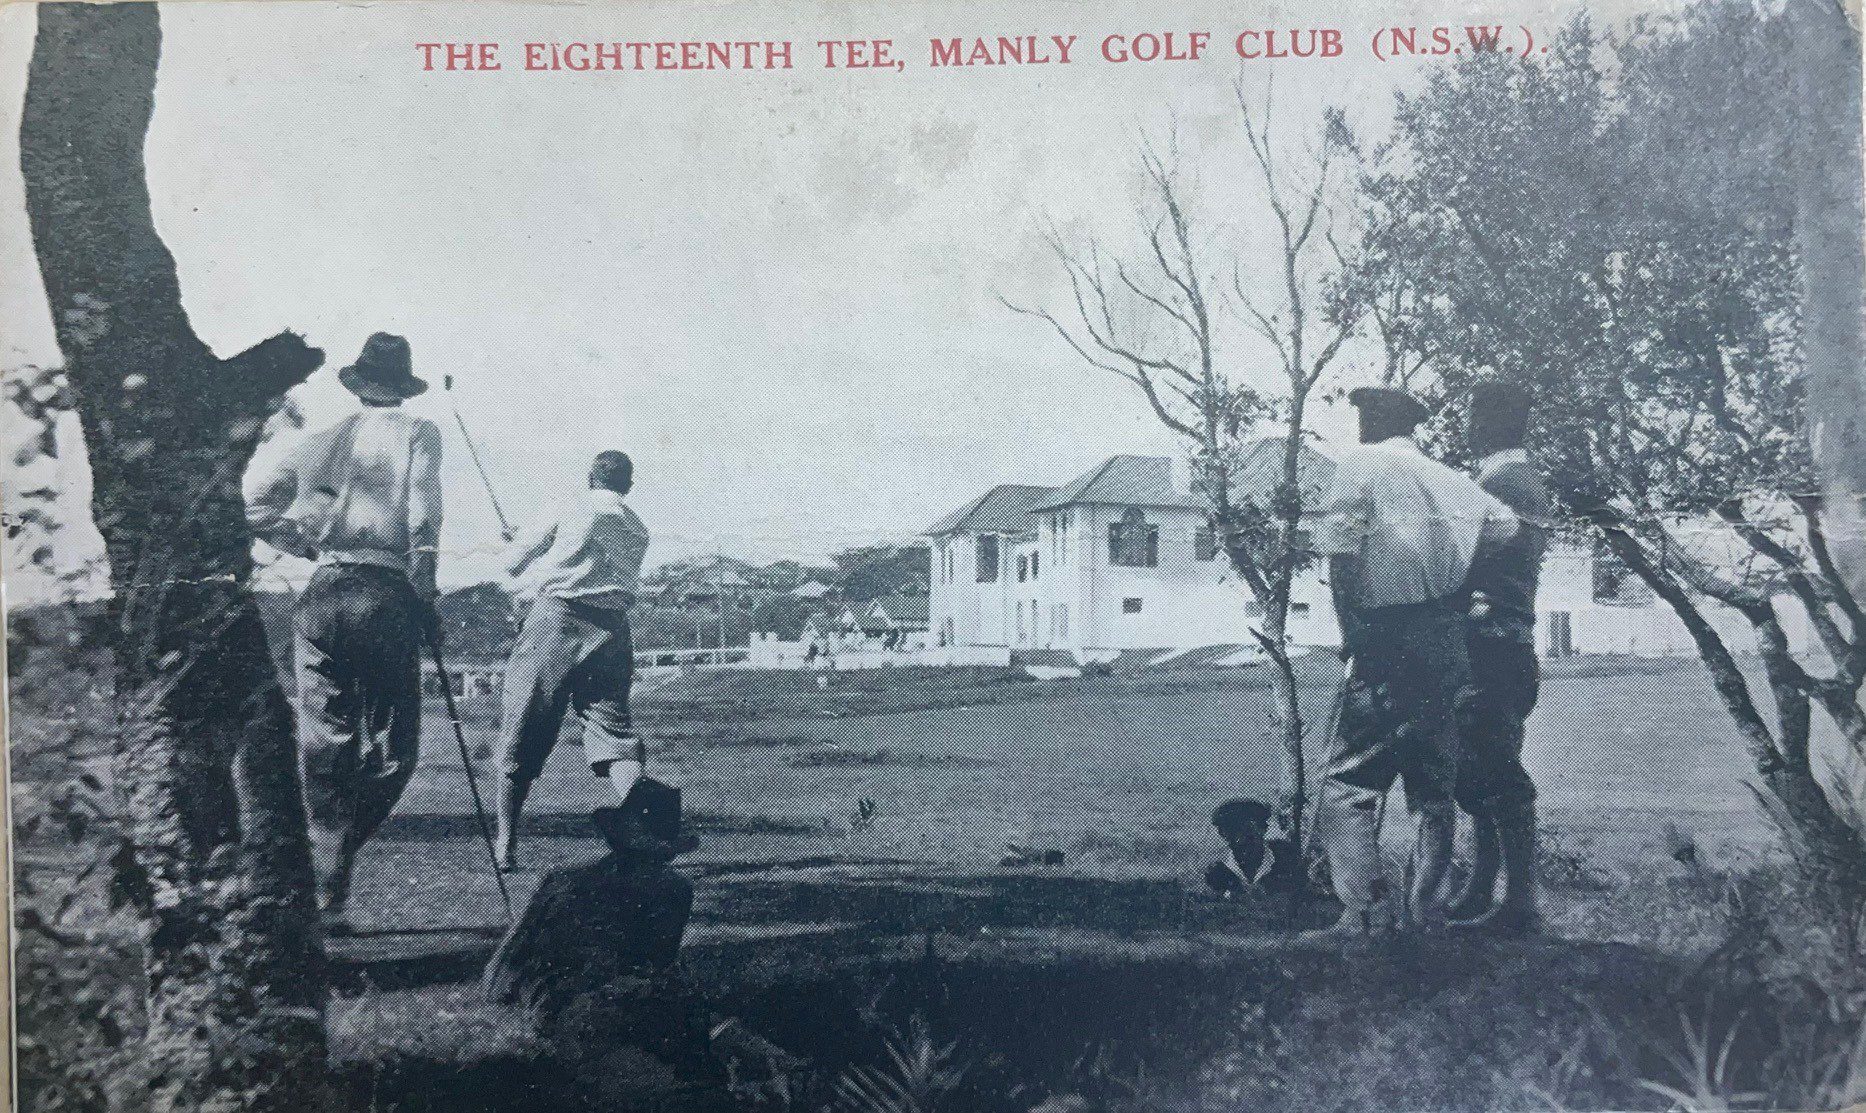 Golfers on the 18th tee at Manly Golf Club